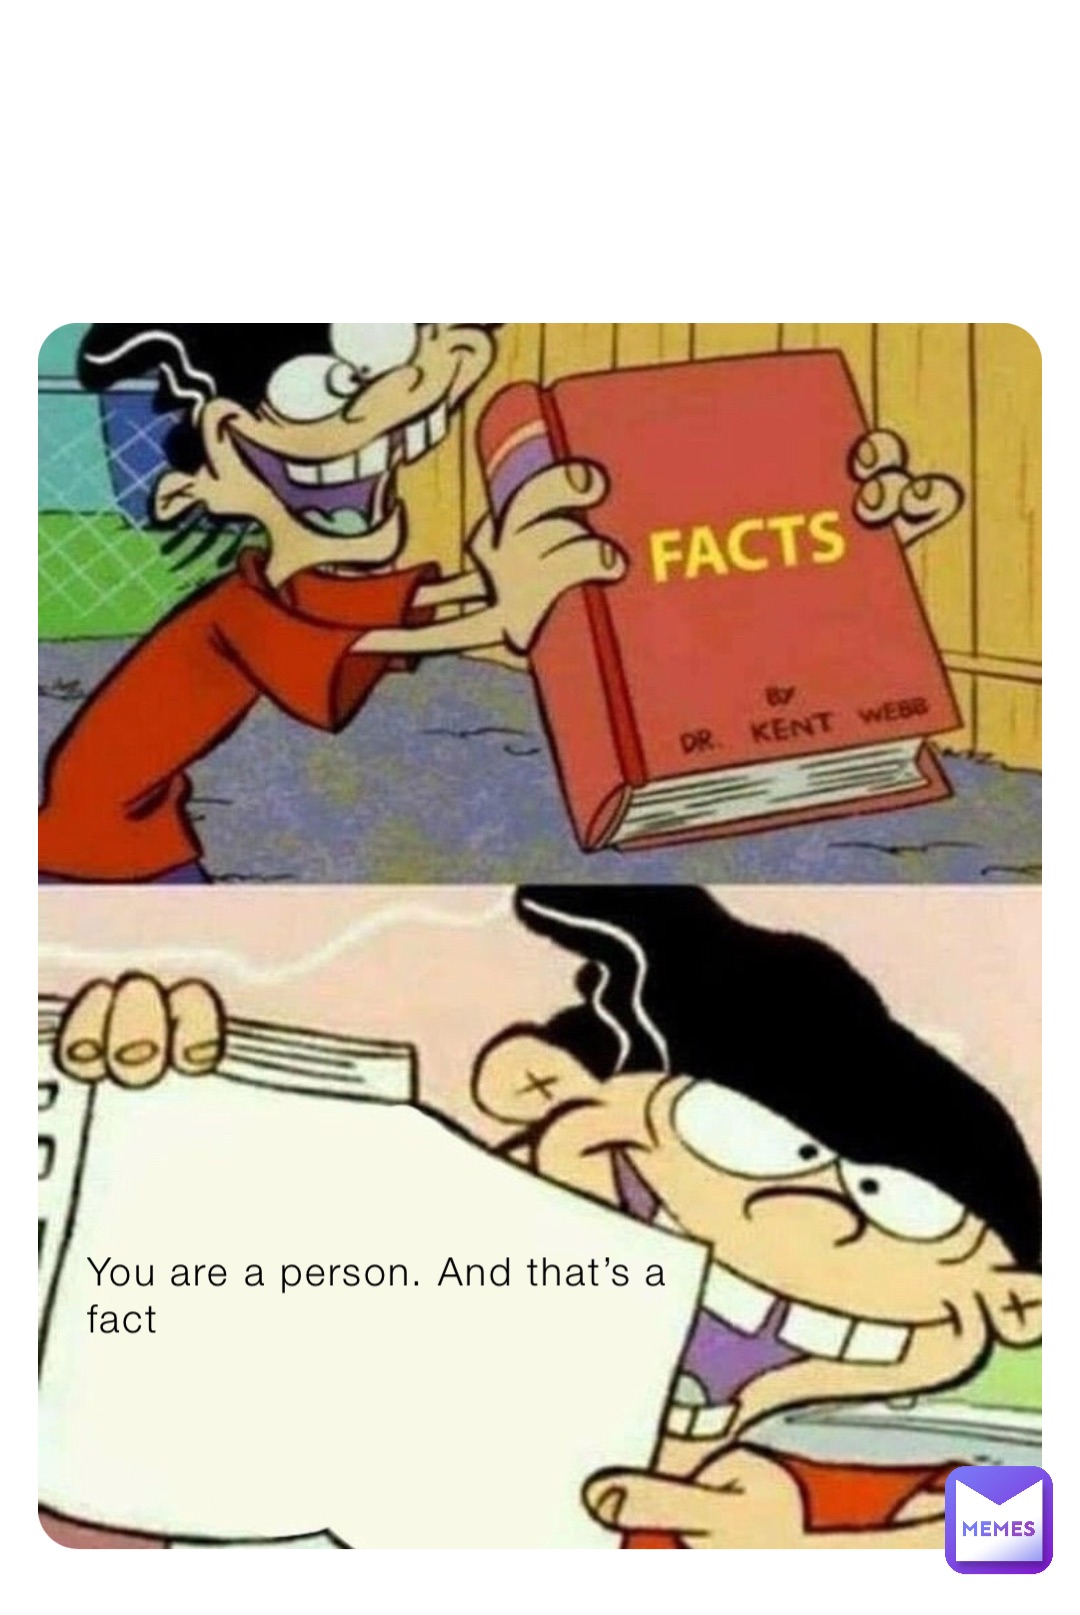 You are a person. And that’s a fact